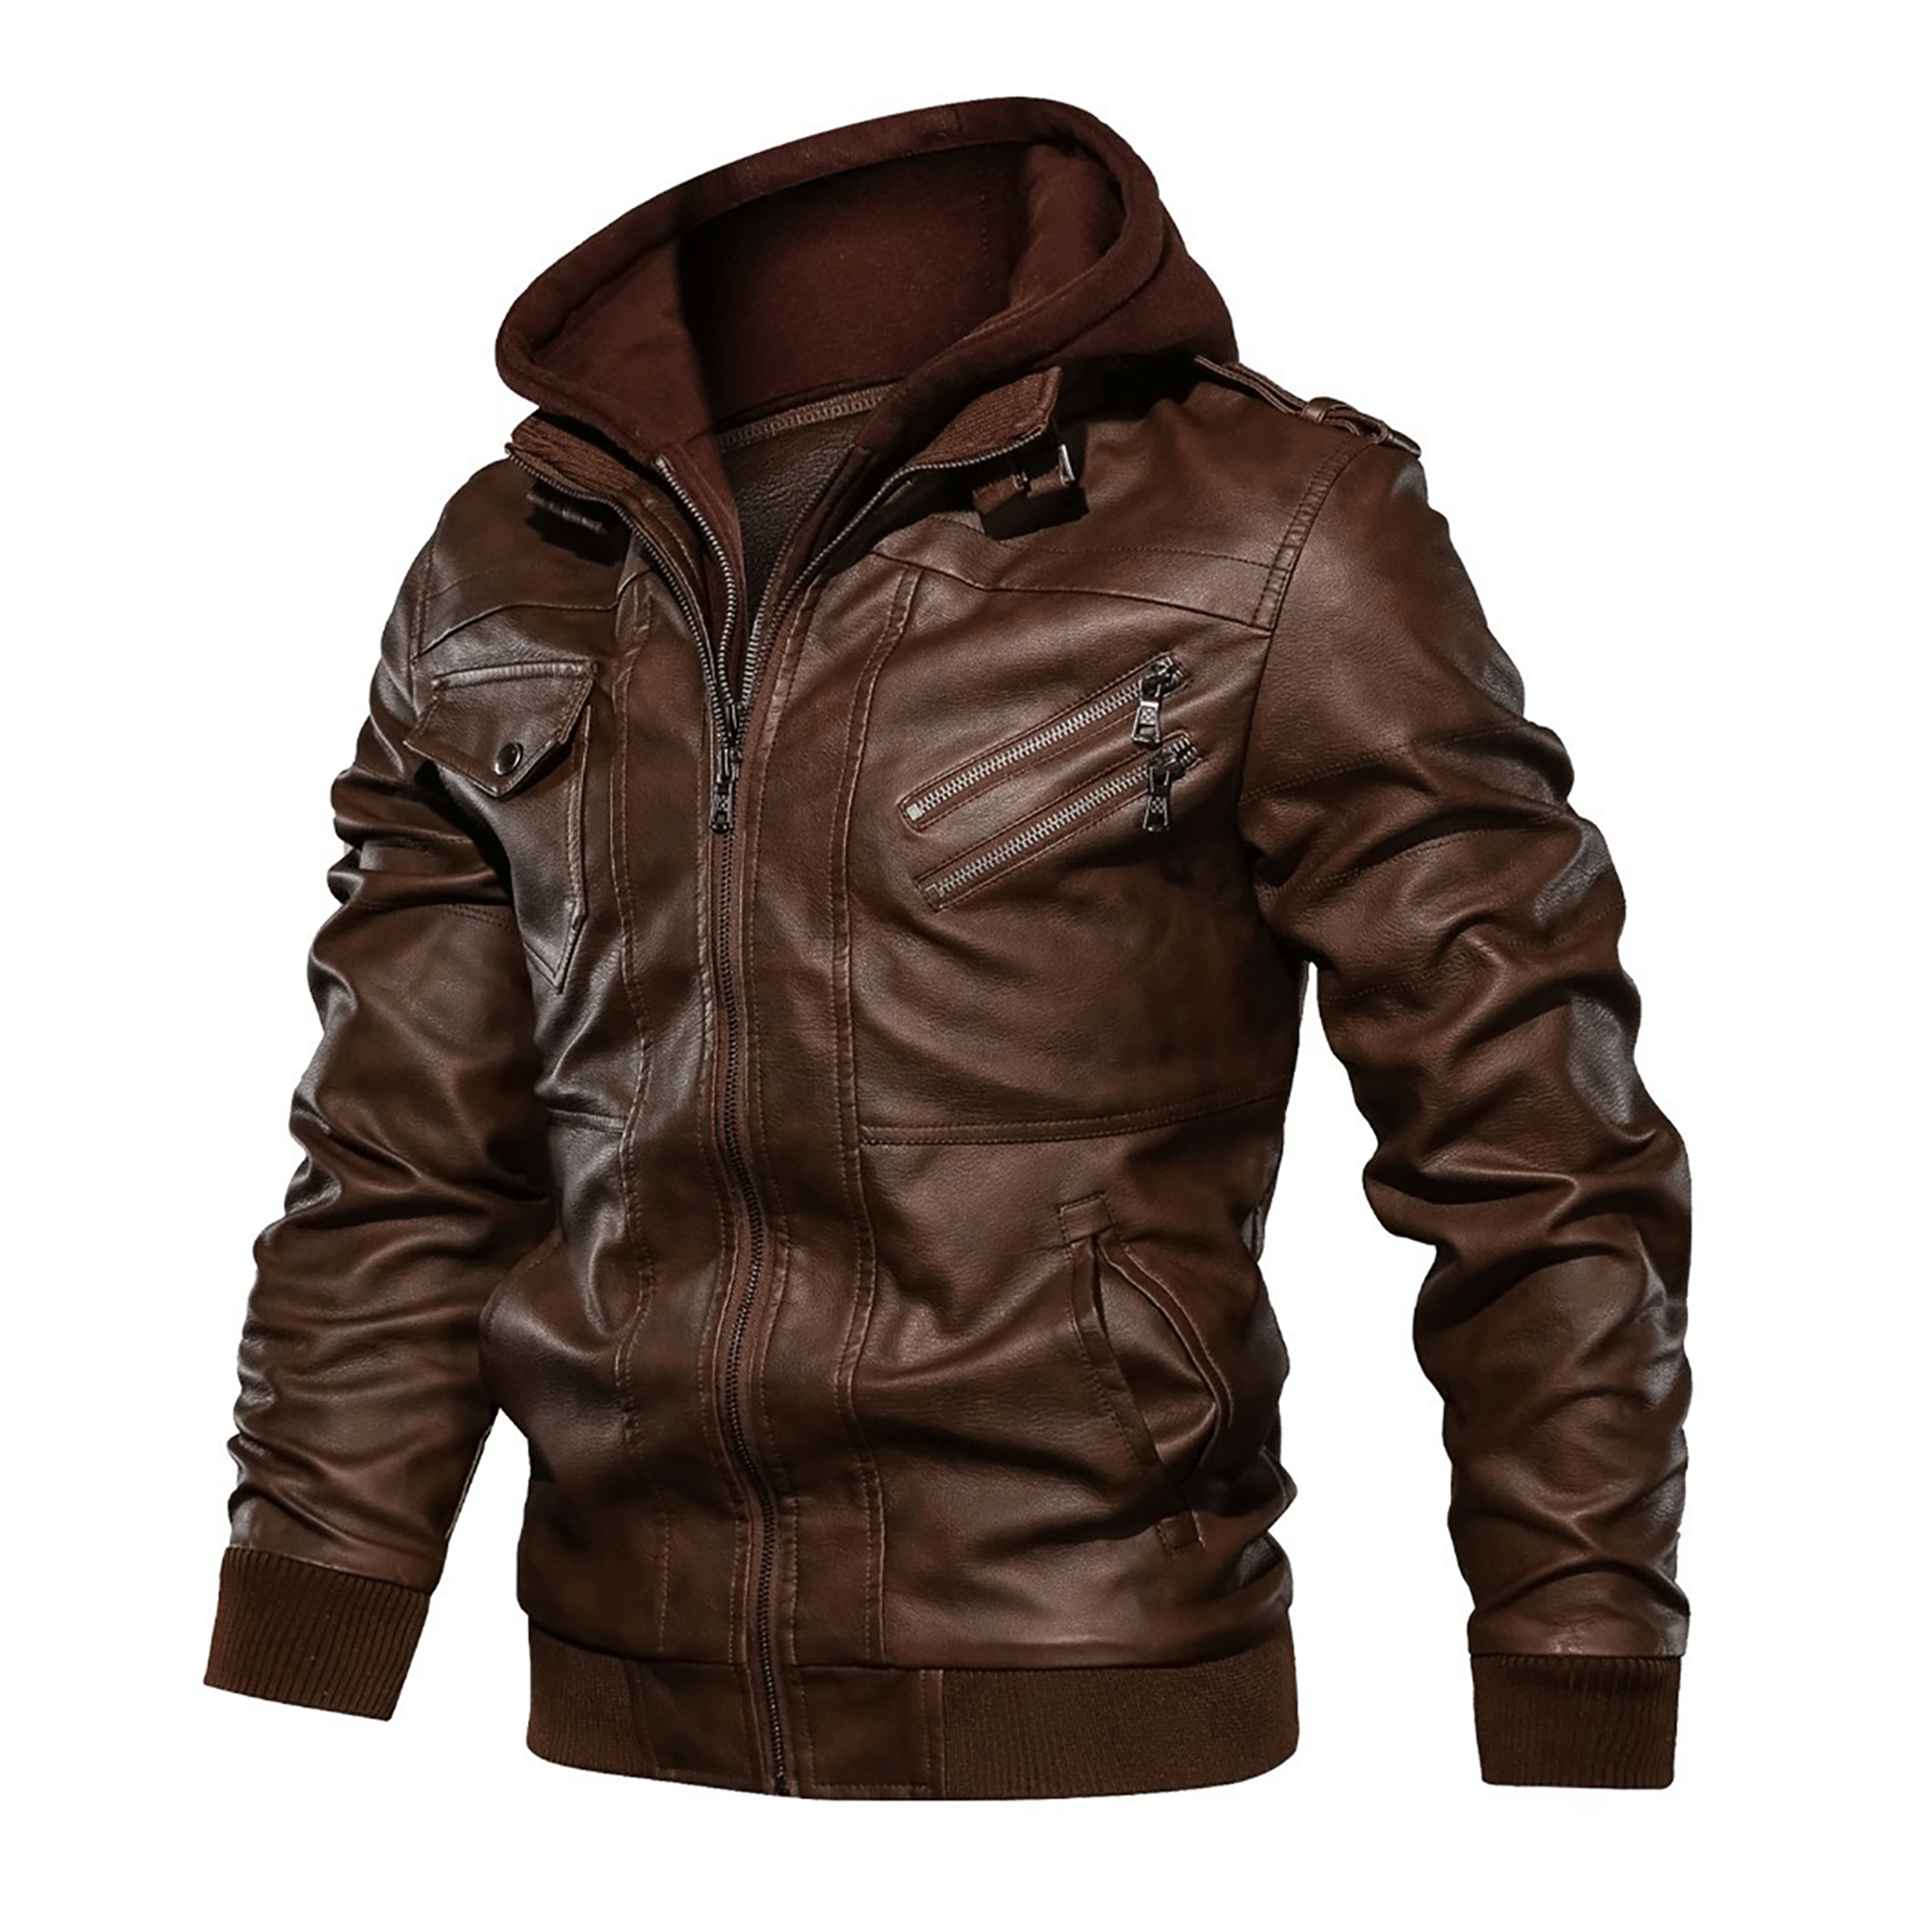 Top leather jackets and latest products 351